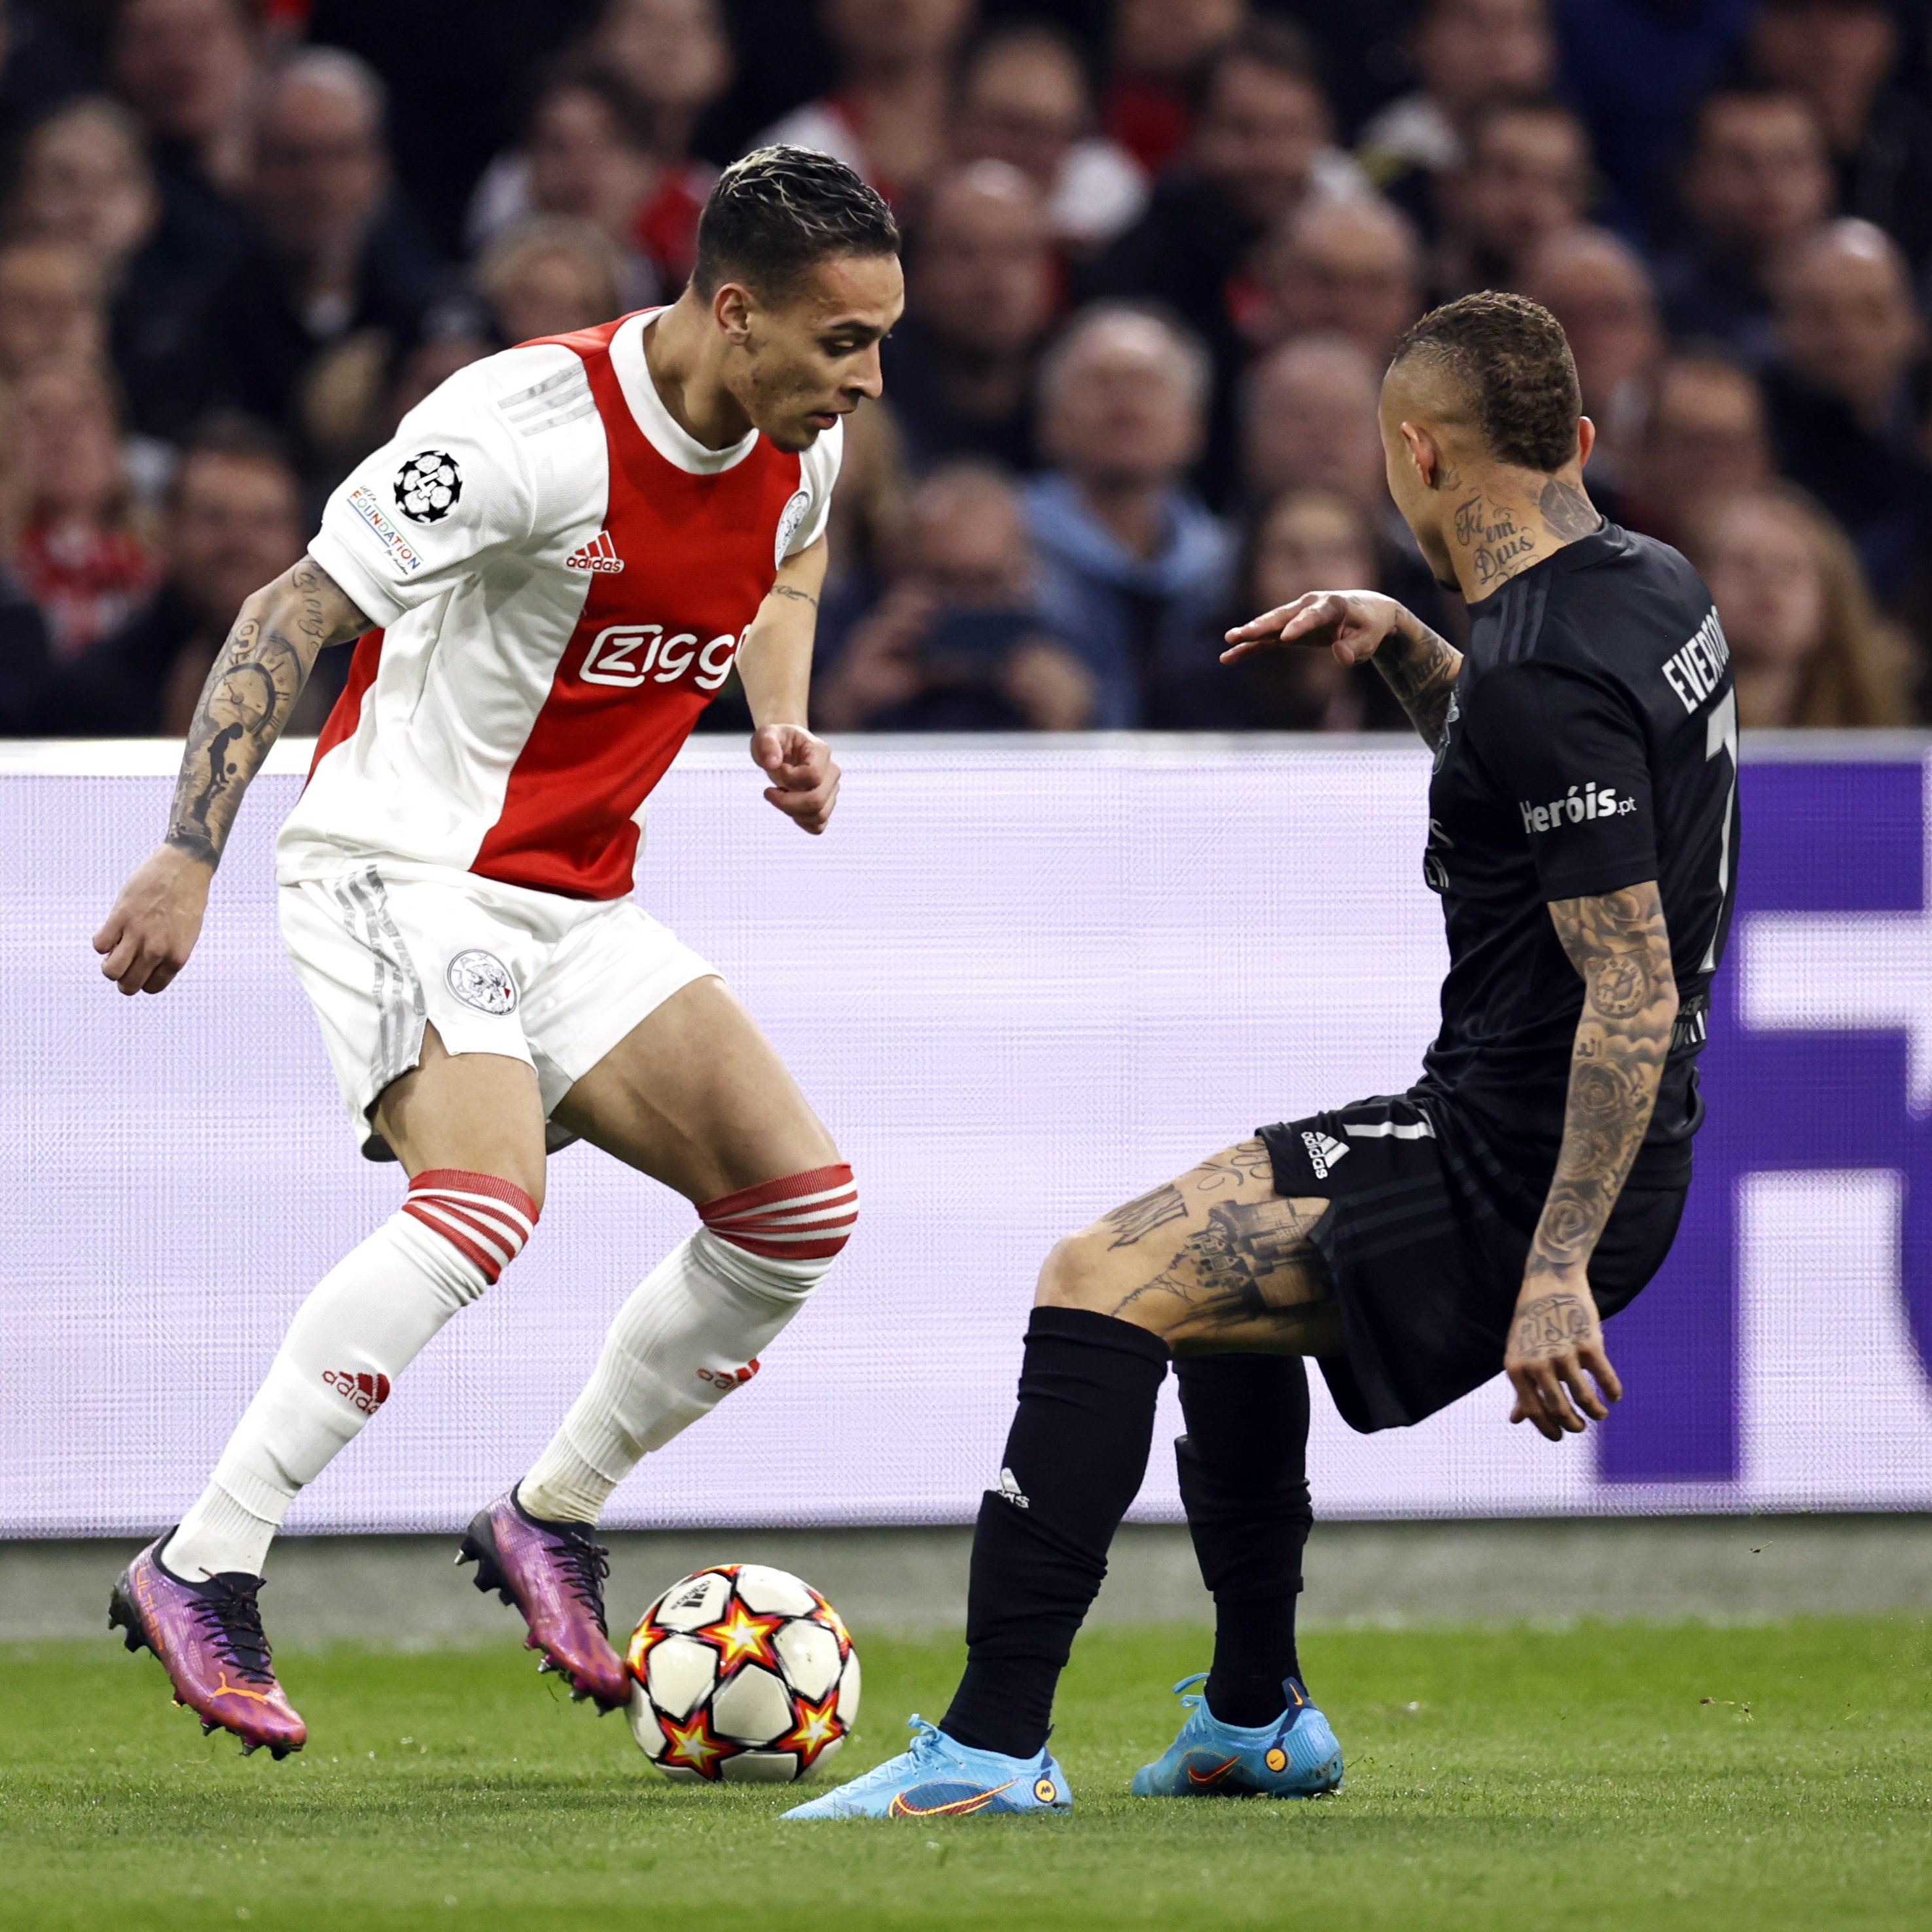 Ajax 0-1 Benfica Highlights: Ajax KNOCKED OUT of the Champions League by Benfica as Darwin Nunez scores the only goal in Amsterdam